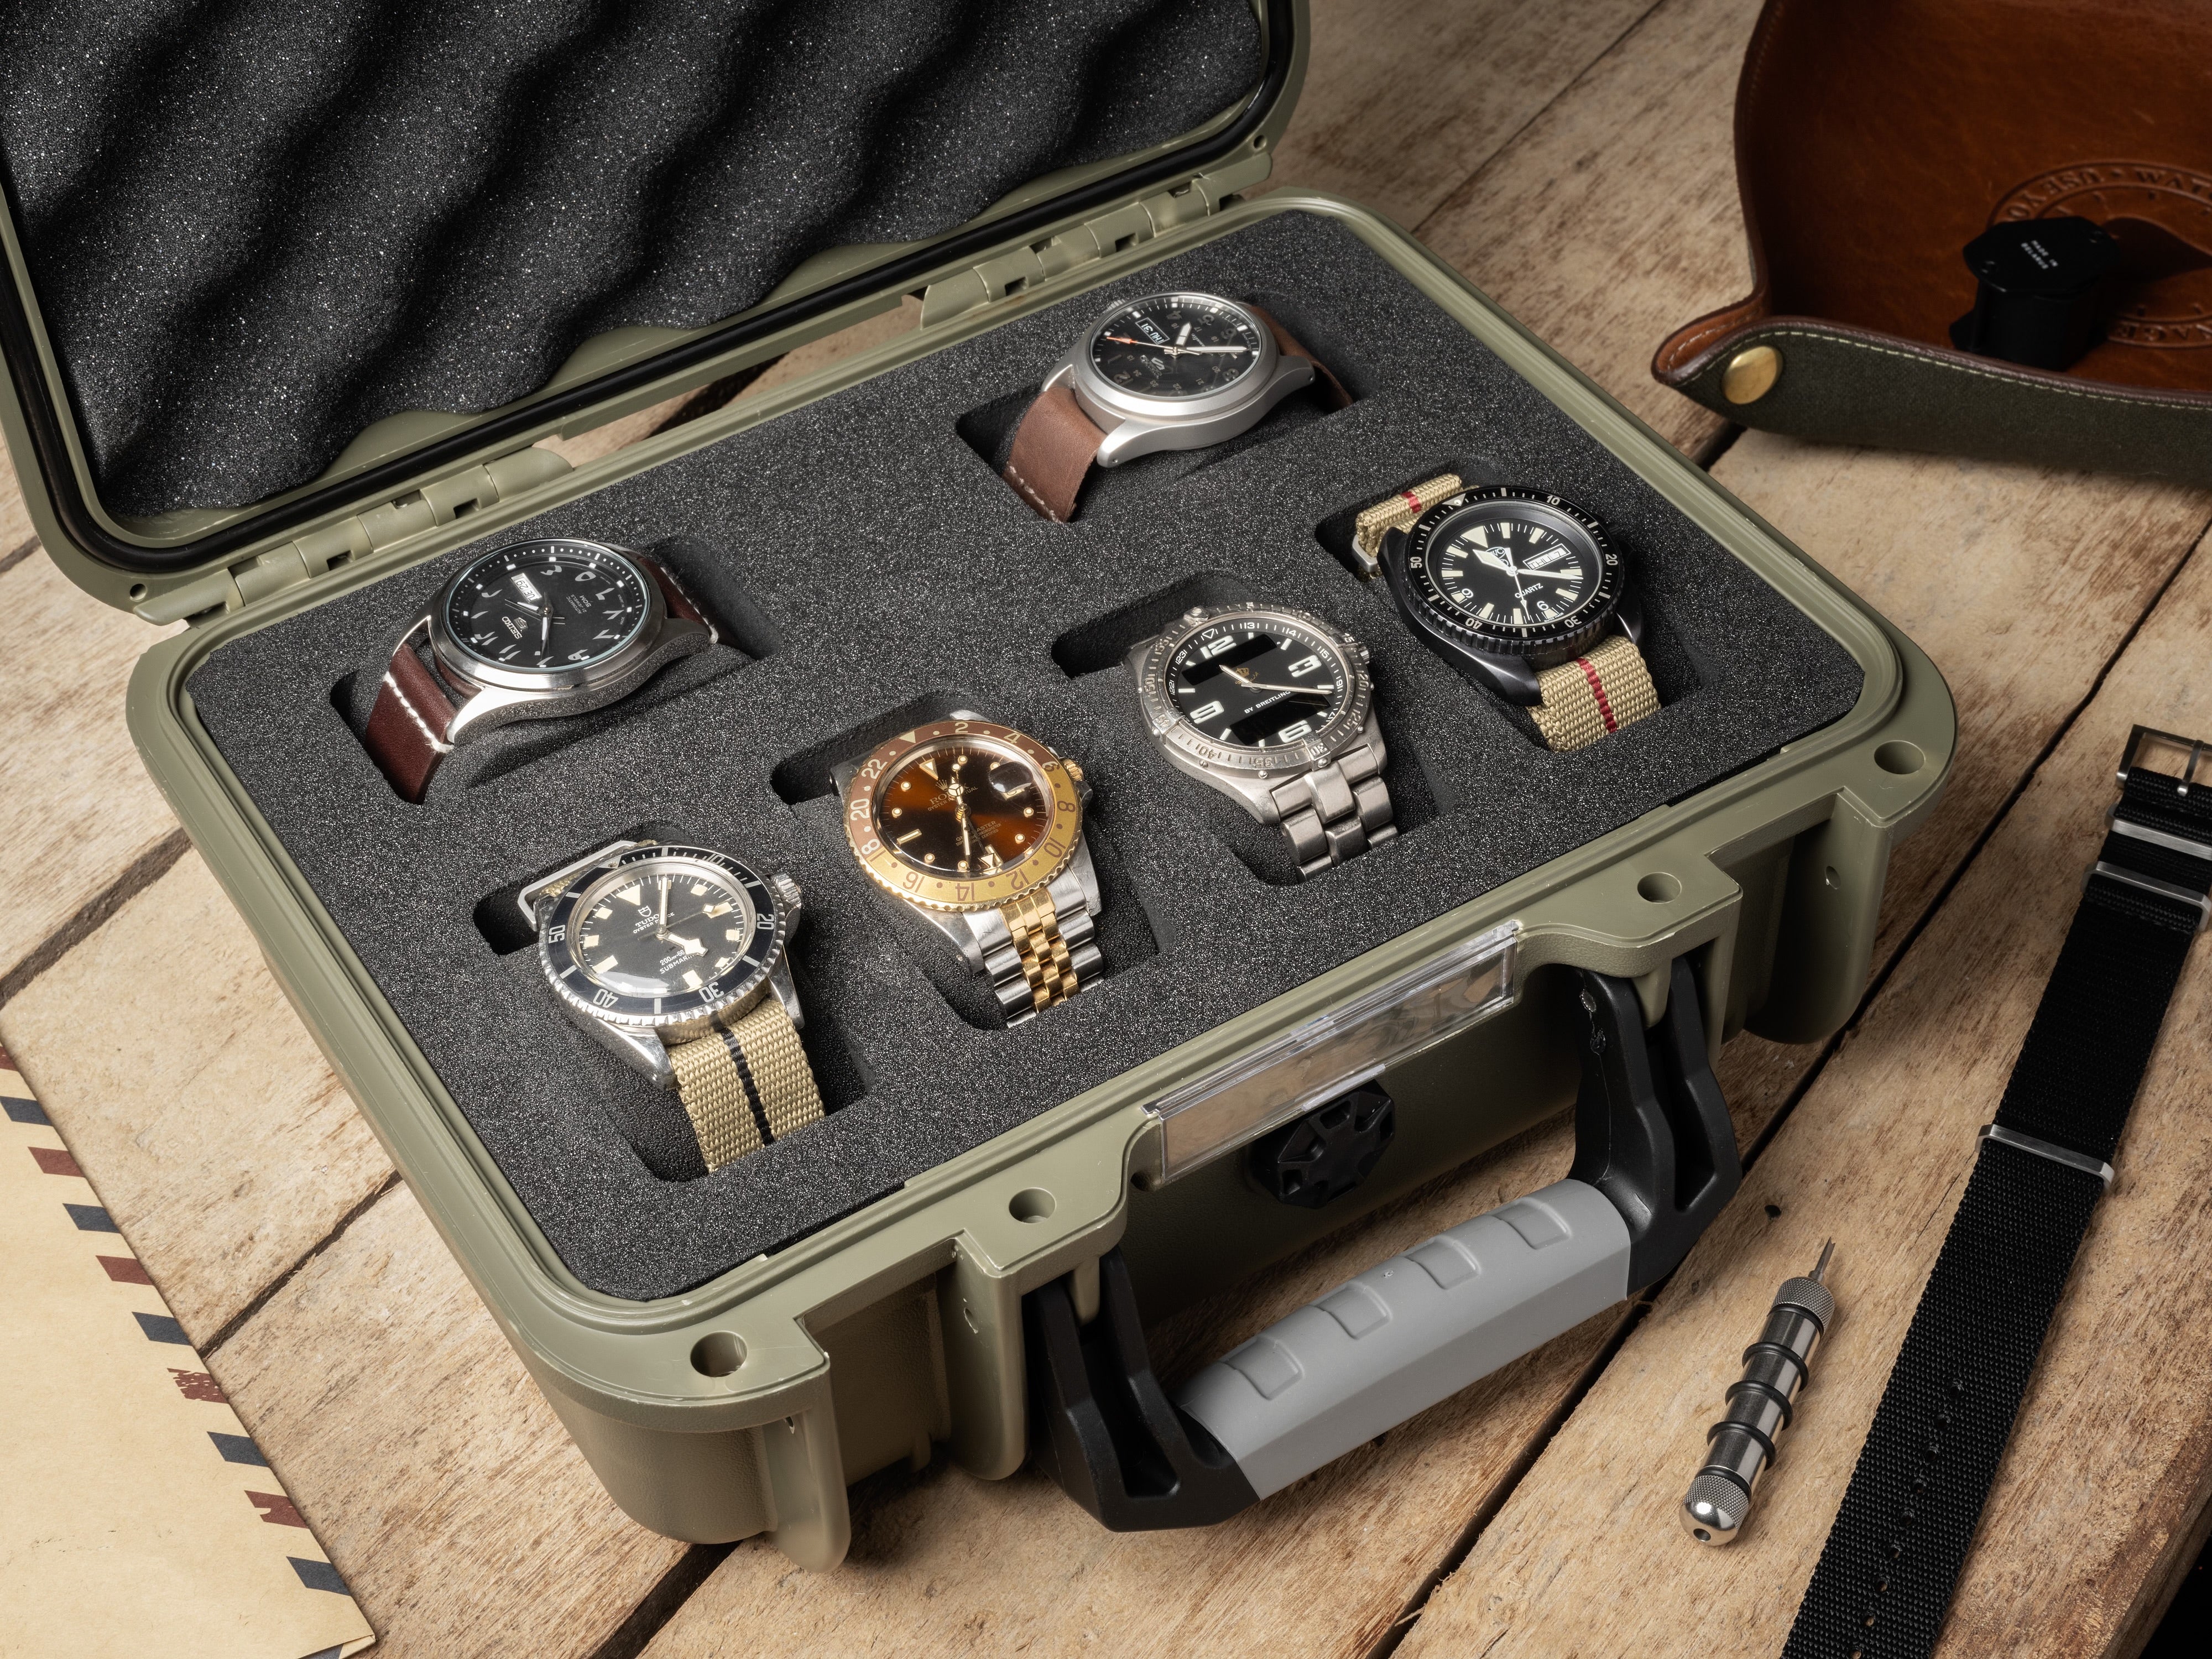 Timepiece Crime and Traveling with Watches, Africa Watch Loadout, Part – WOE